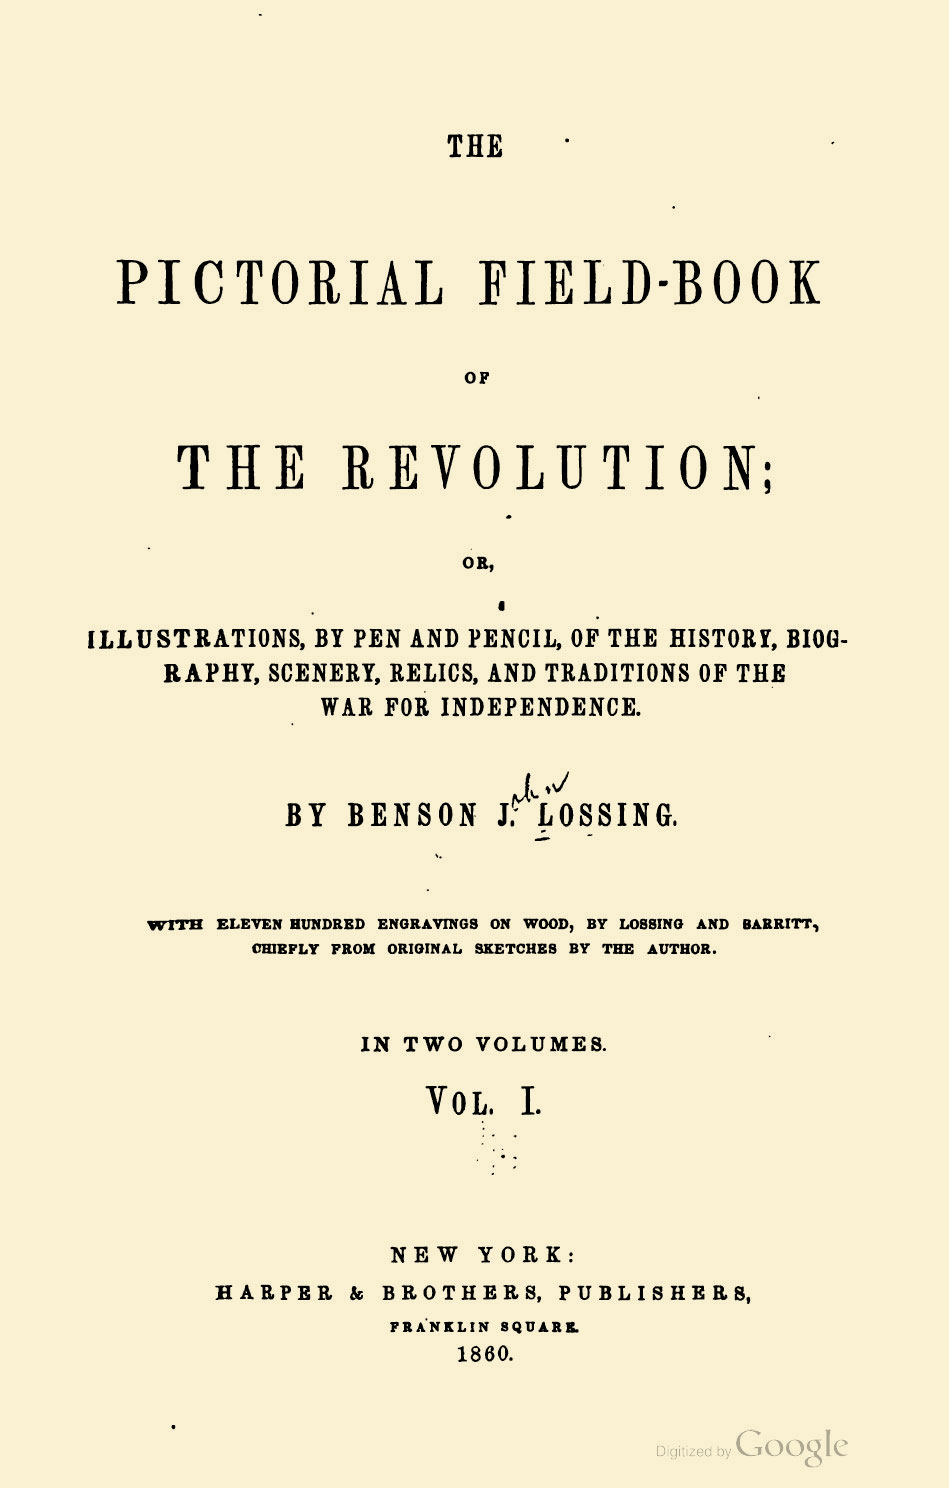 Lossing---The-Pictorial-Field-Book-of-the-Revolution-16.jpg